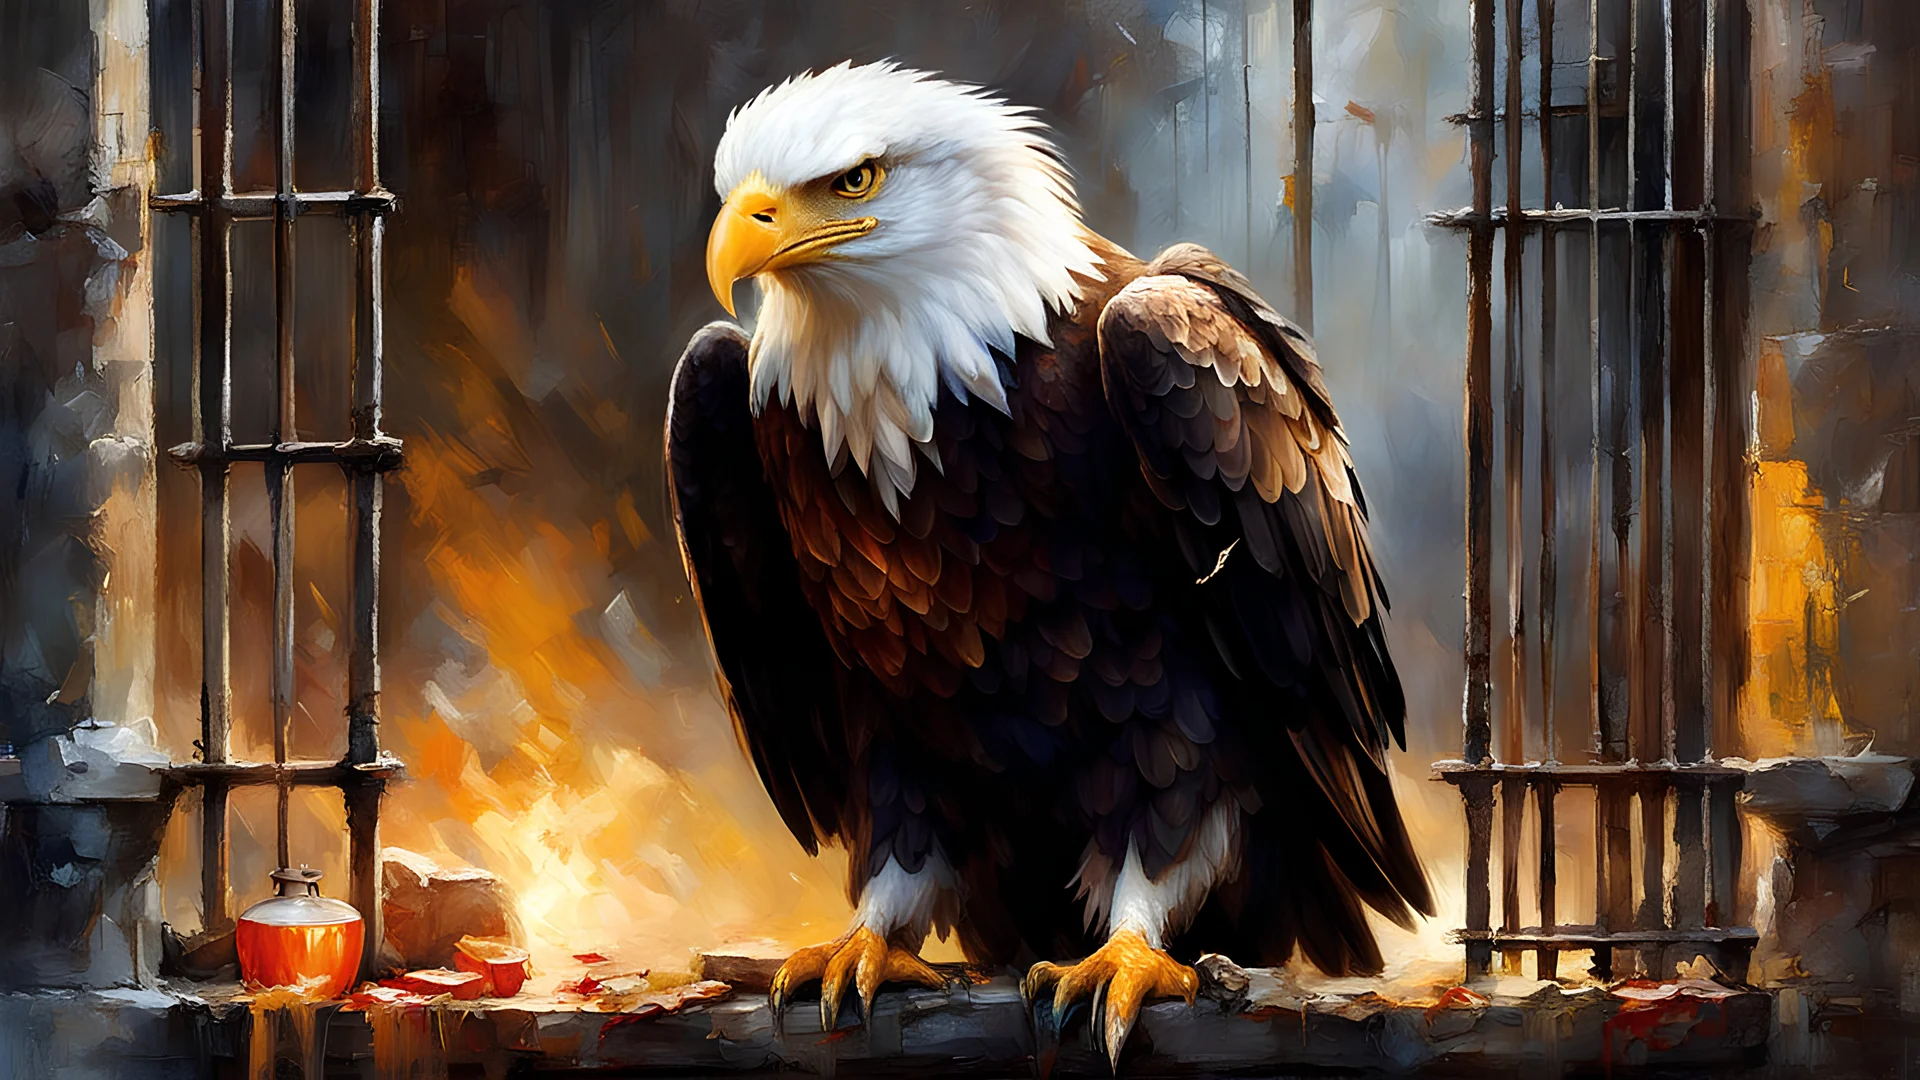 (My sad fellow eagle is a young eagle, pecking bloody food in the dungeon behind bars.), soft impressionist brushstrokes, richard schmid style canvas texture, magical glow, magical lighting, by Jean-Baptiste Monge: 20 Artgerm:5 and Greg Rutkowski:30, by richard schmid :10, Painting by richard schmid